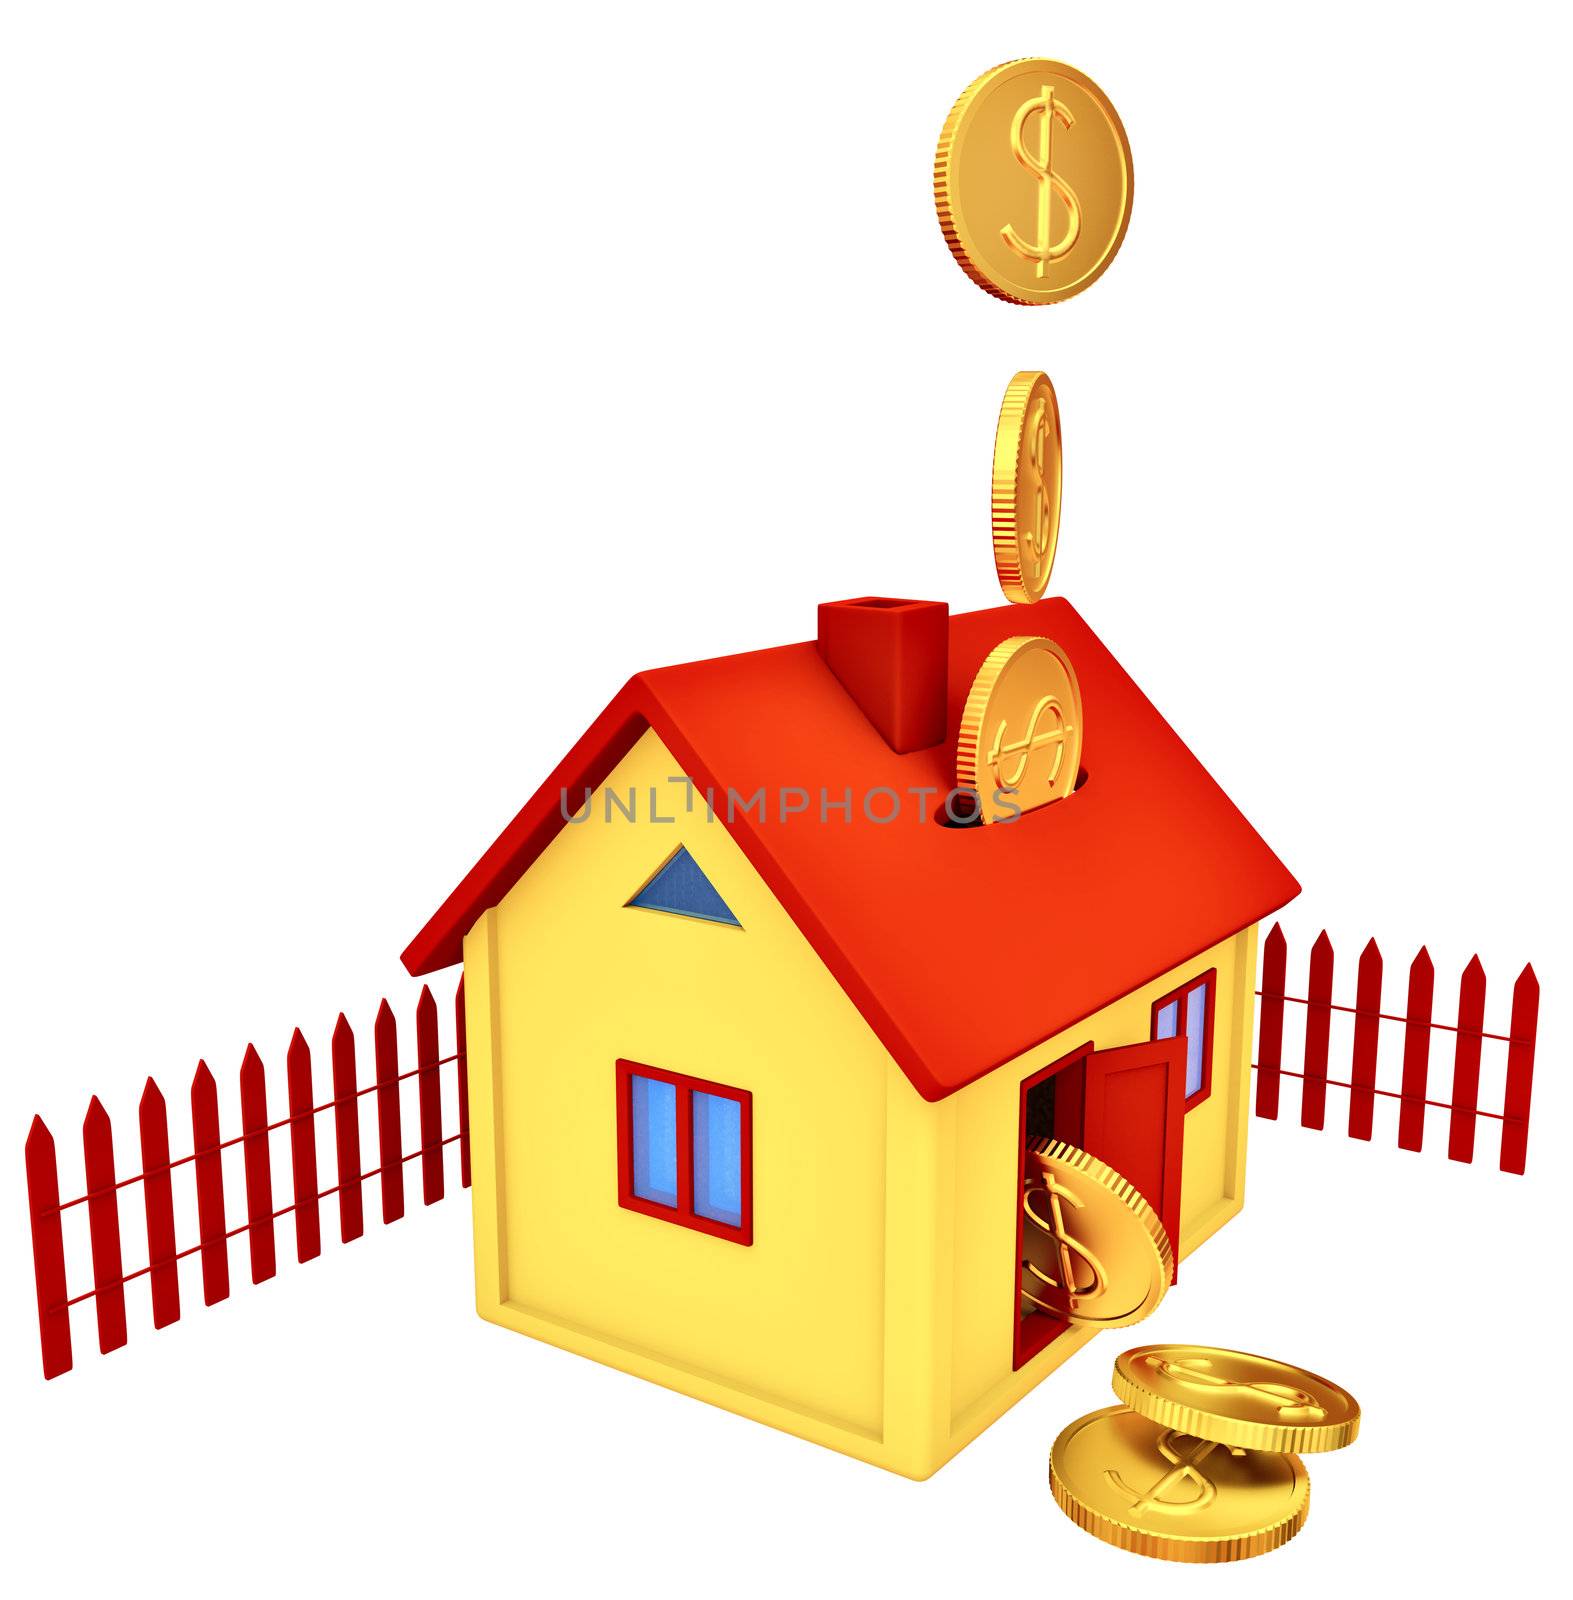 dollar coins falling down into a piggy bank in the form of a gilded house as a symbol of the accumulation